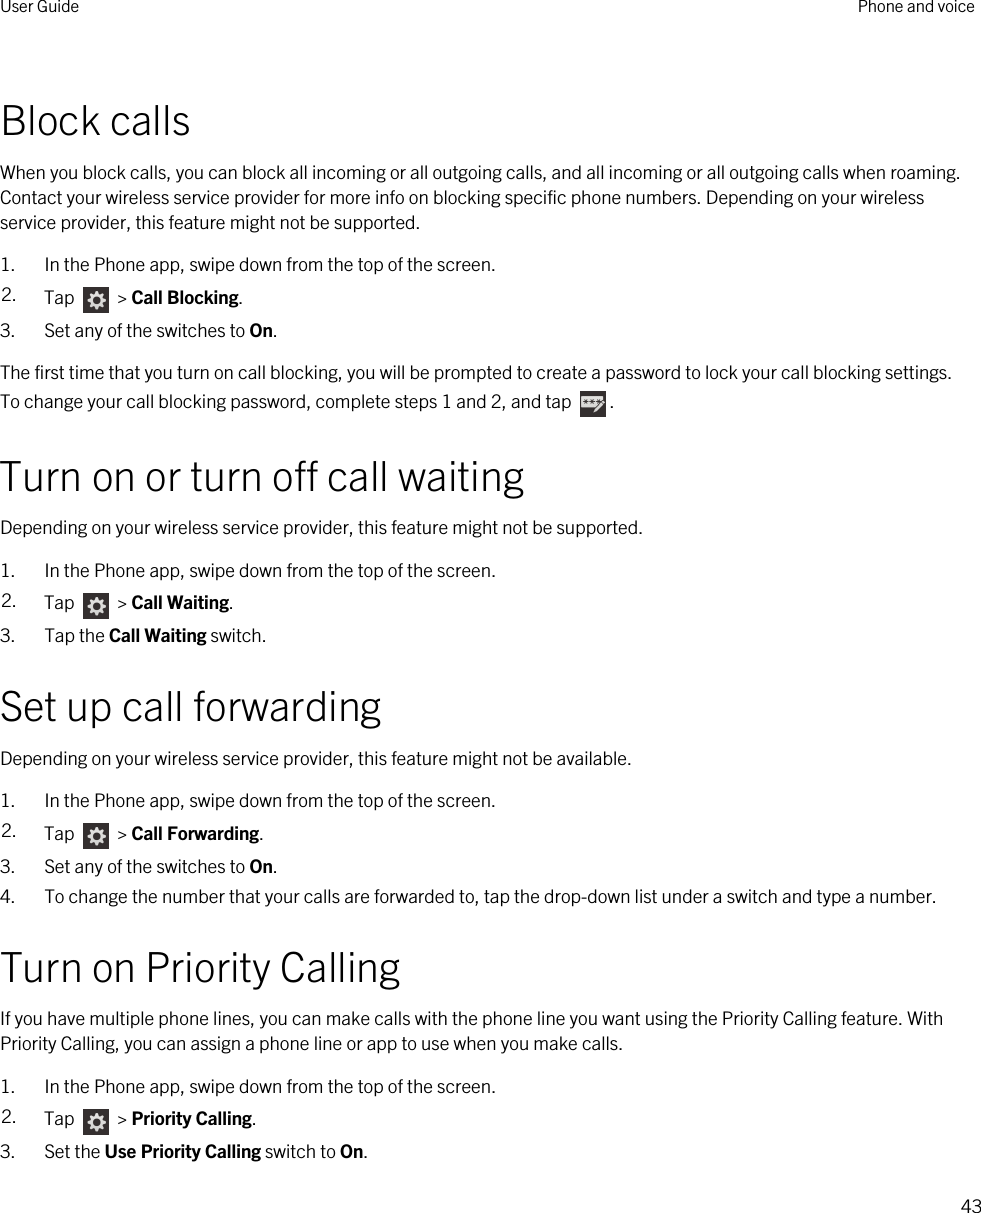 Block callsWhen you block calls, you can block all incoming or all outgoing calls, and all incoming or all outgoing calls when roaming. Contact your wireless service provider for more info on blocking specific phone numbers. Depending on your wireless service provider, this feature might not be supported. 1. In the Phone app, swipe down from the top of the screen.2. Tap   &gt; Call Blocking.3. Set any of the switches to On.The first time that you turn on call blocking, you will be prompted to create a password to lock your call blocking settings. To change your call blocking password, complete steps 1 and 2, and tap  .Turn on or turn off call waitingDepending on your wireless service provider, this feature might not be supported. 1. In the Phone app, swipe down from the top of the screen.2. Tap   &gt; Call Waiting.3. Tap the Call Waiting switch.Set up call forwardingDepending on your wireless service provider, this feature might not be available.1. In the Phone app, swipe down from the top of the screen.2. Tap   &gt; Call Forwarding.3. Set any of the switches to On.4. To change the number that your calls are forwarded to, tap the drop-down list under a switch and type a number.Turn on Priority CallingIf you have multiple phone lines, you can make calls with the phone line you want using the Priority Calling feature. With Priority Calling, you can assign a phone line or app to use when you make calls.1. In the Phone app, swipe down from the top of the screen.2. Tap   &gt; Priority Calling.3. Set the Use Priority Calling switch to On.User Guide Phone and voice43